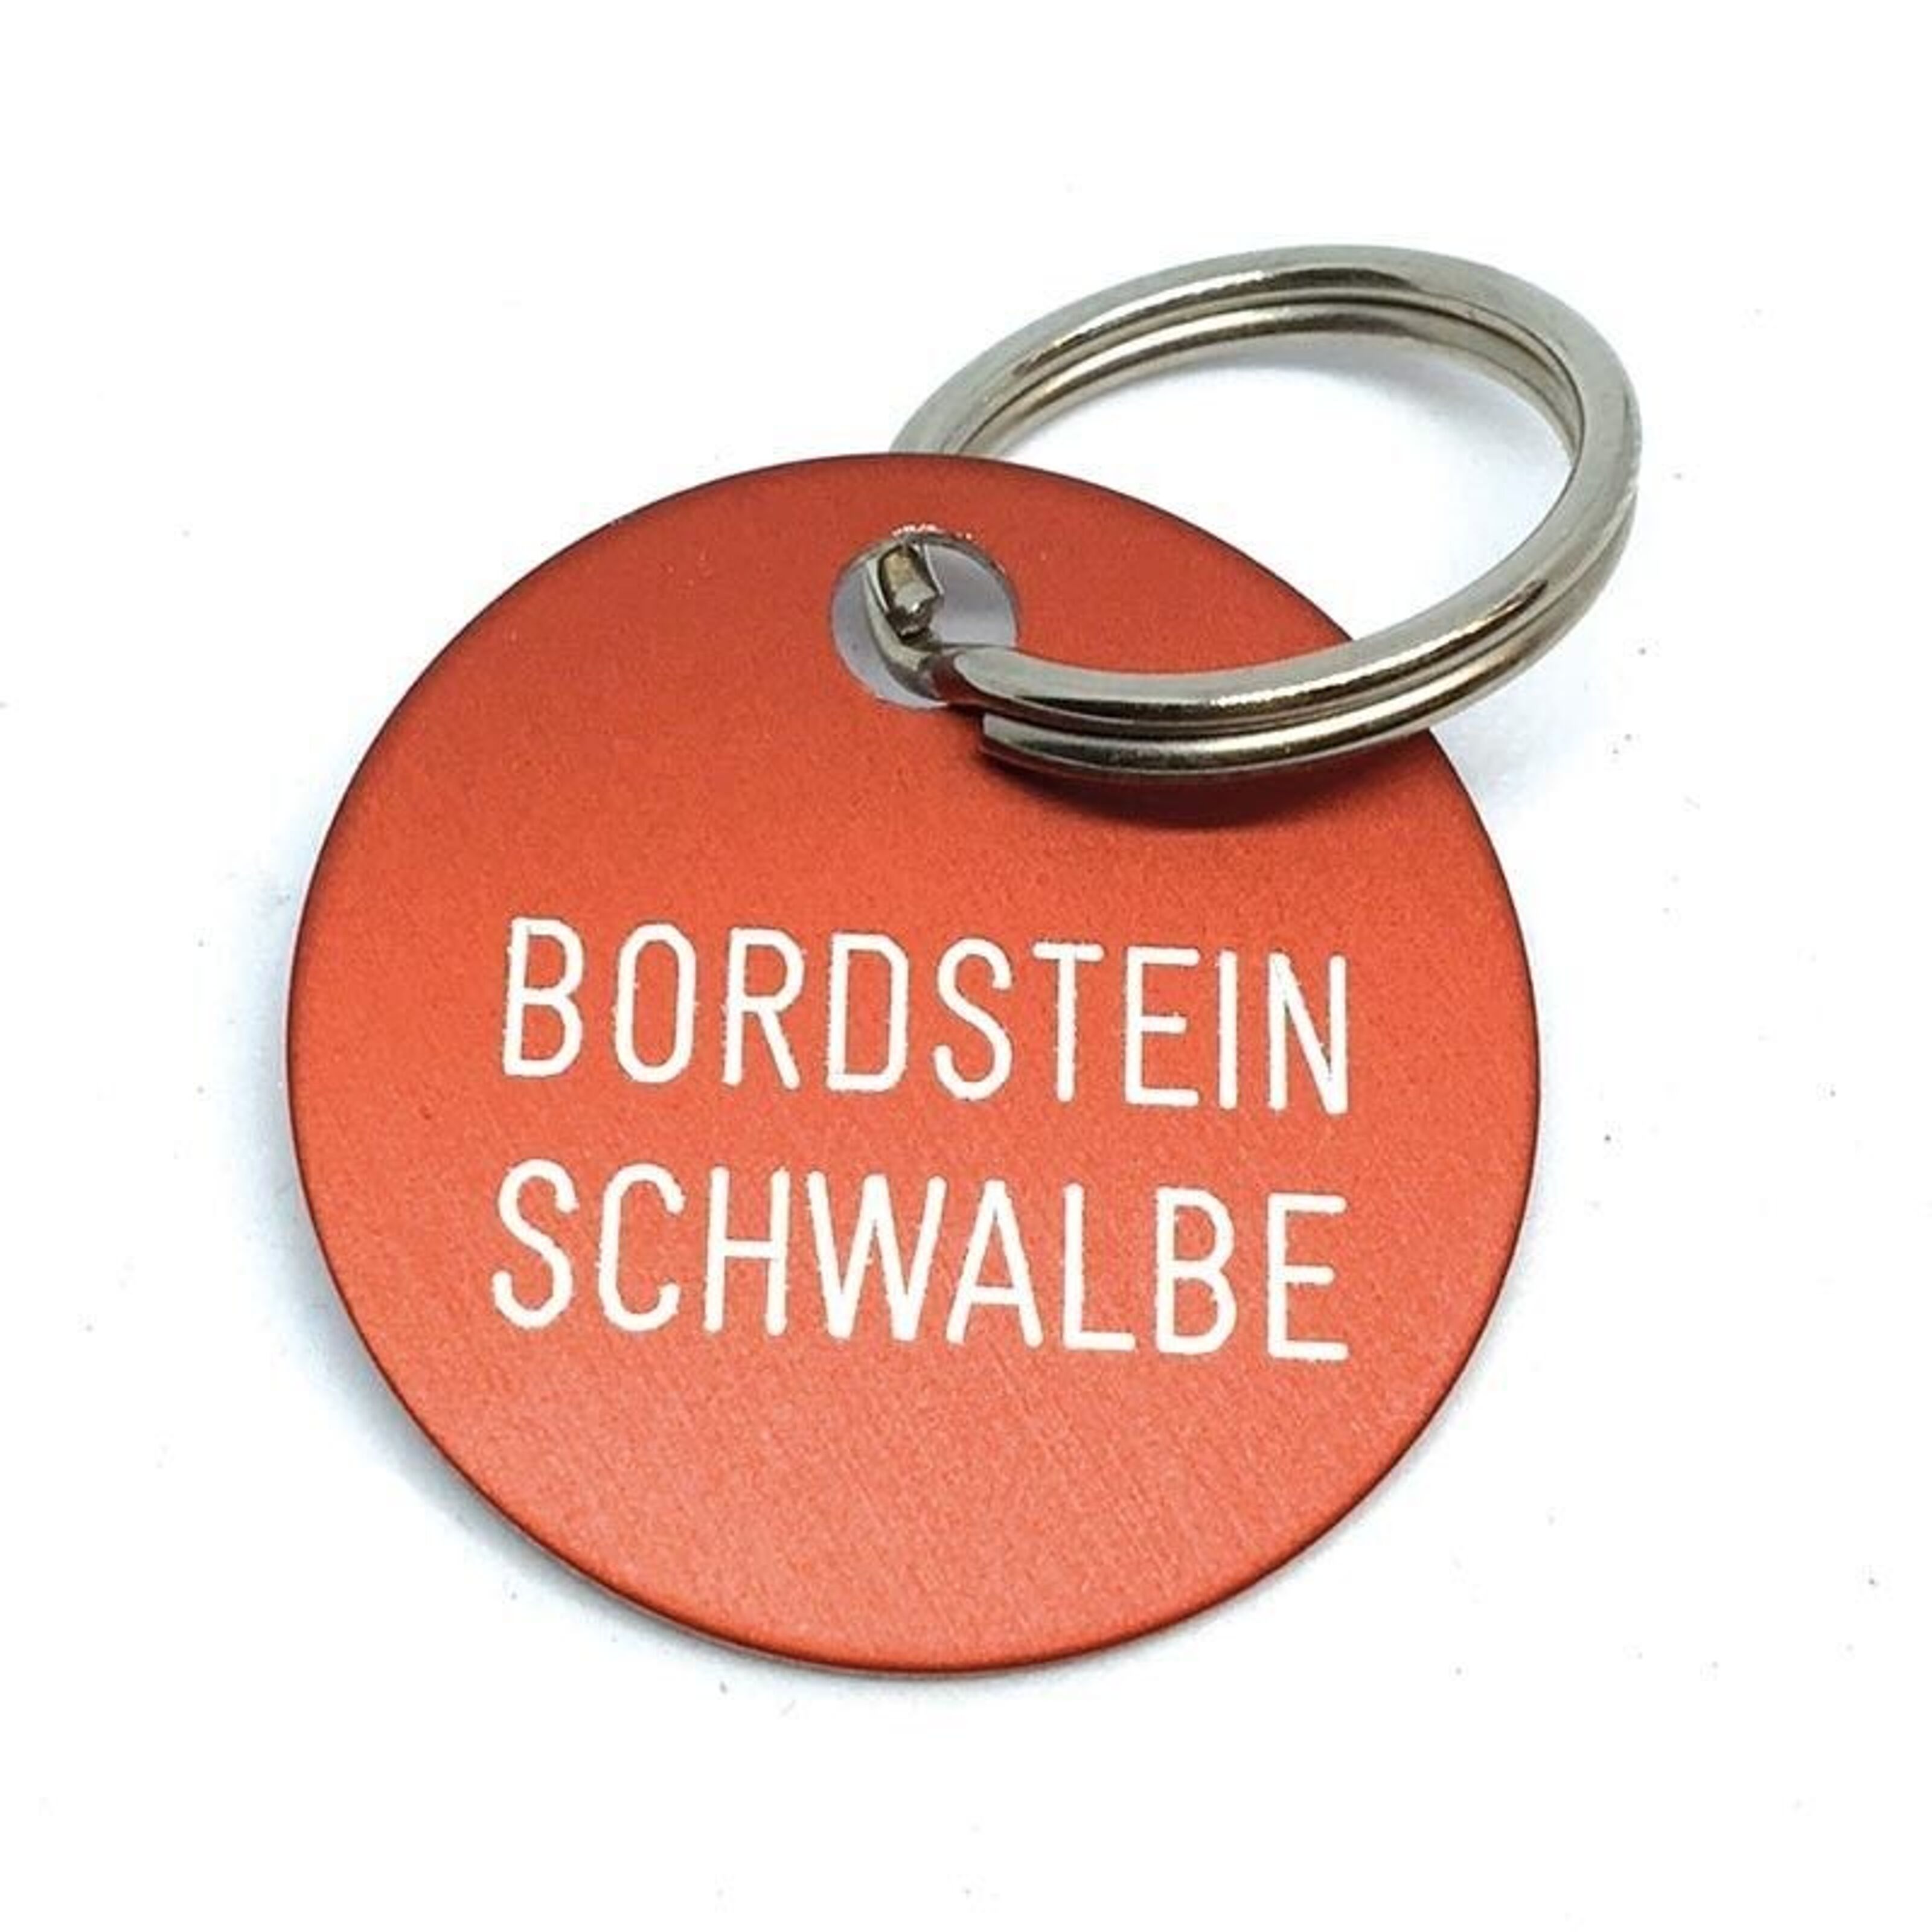 Buy wholesale Swallow” and design items “Curbstone Gift Keychain